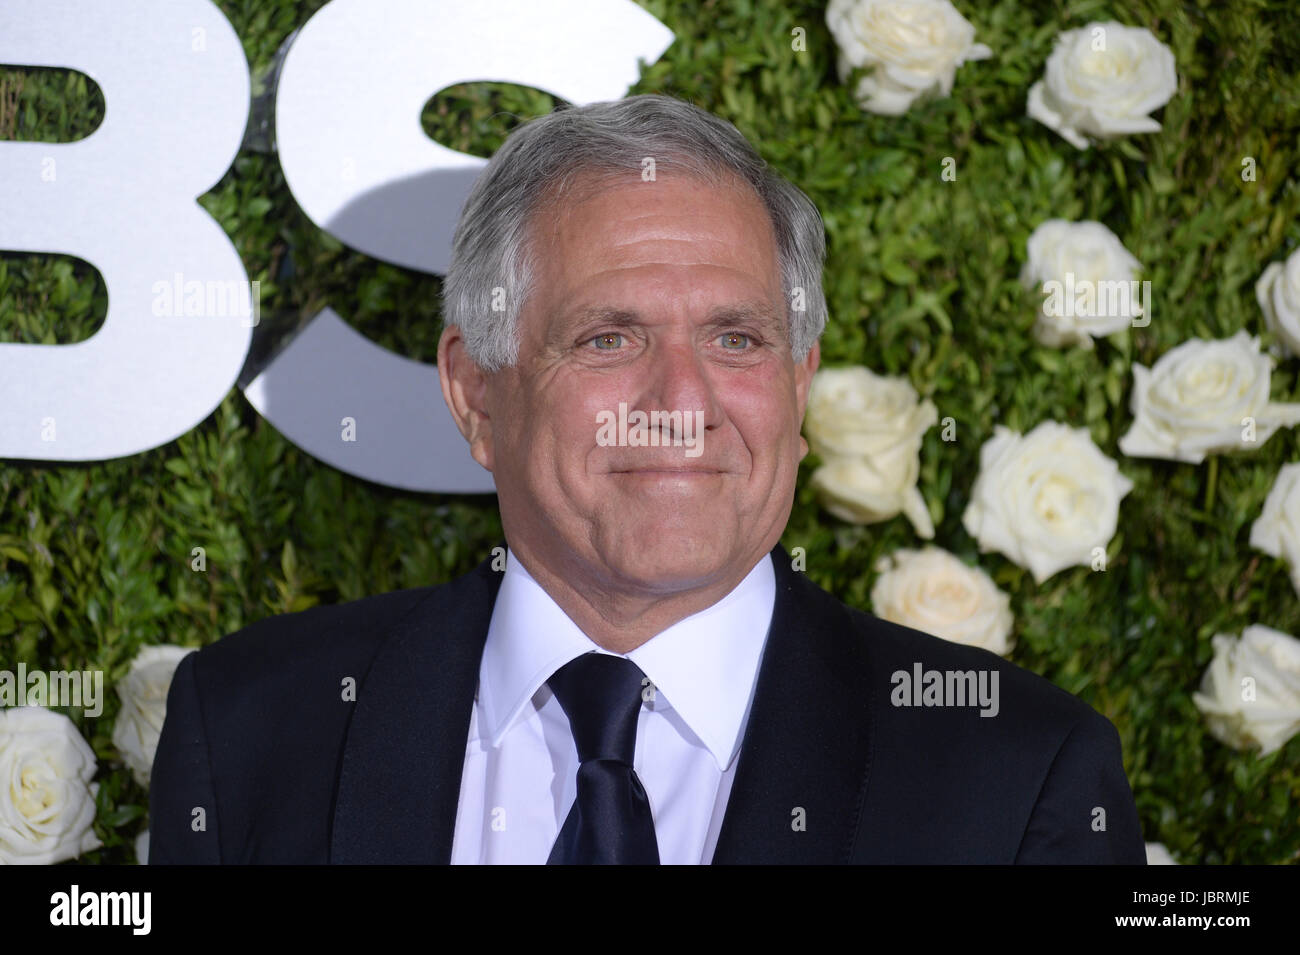 New York, USA. 11th Jun, 2017. Leslie Moonves attends the 2017 Tony Awards at Radio City Music Hall on June 11, 2017 in New York City. Credit: Erik Pendzich/Alamy Live News Stock Photo